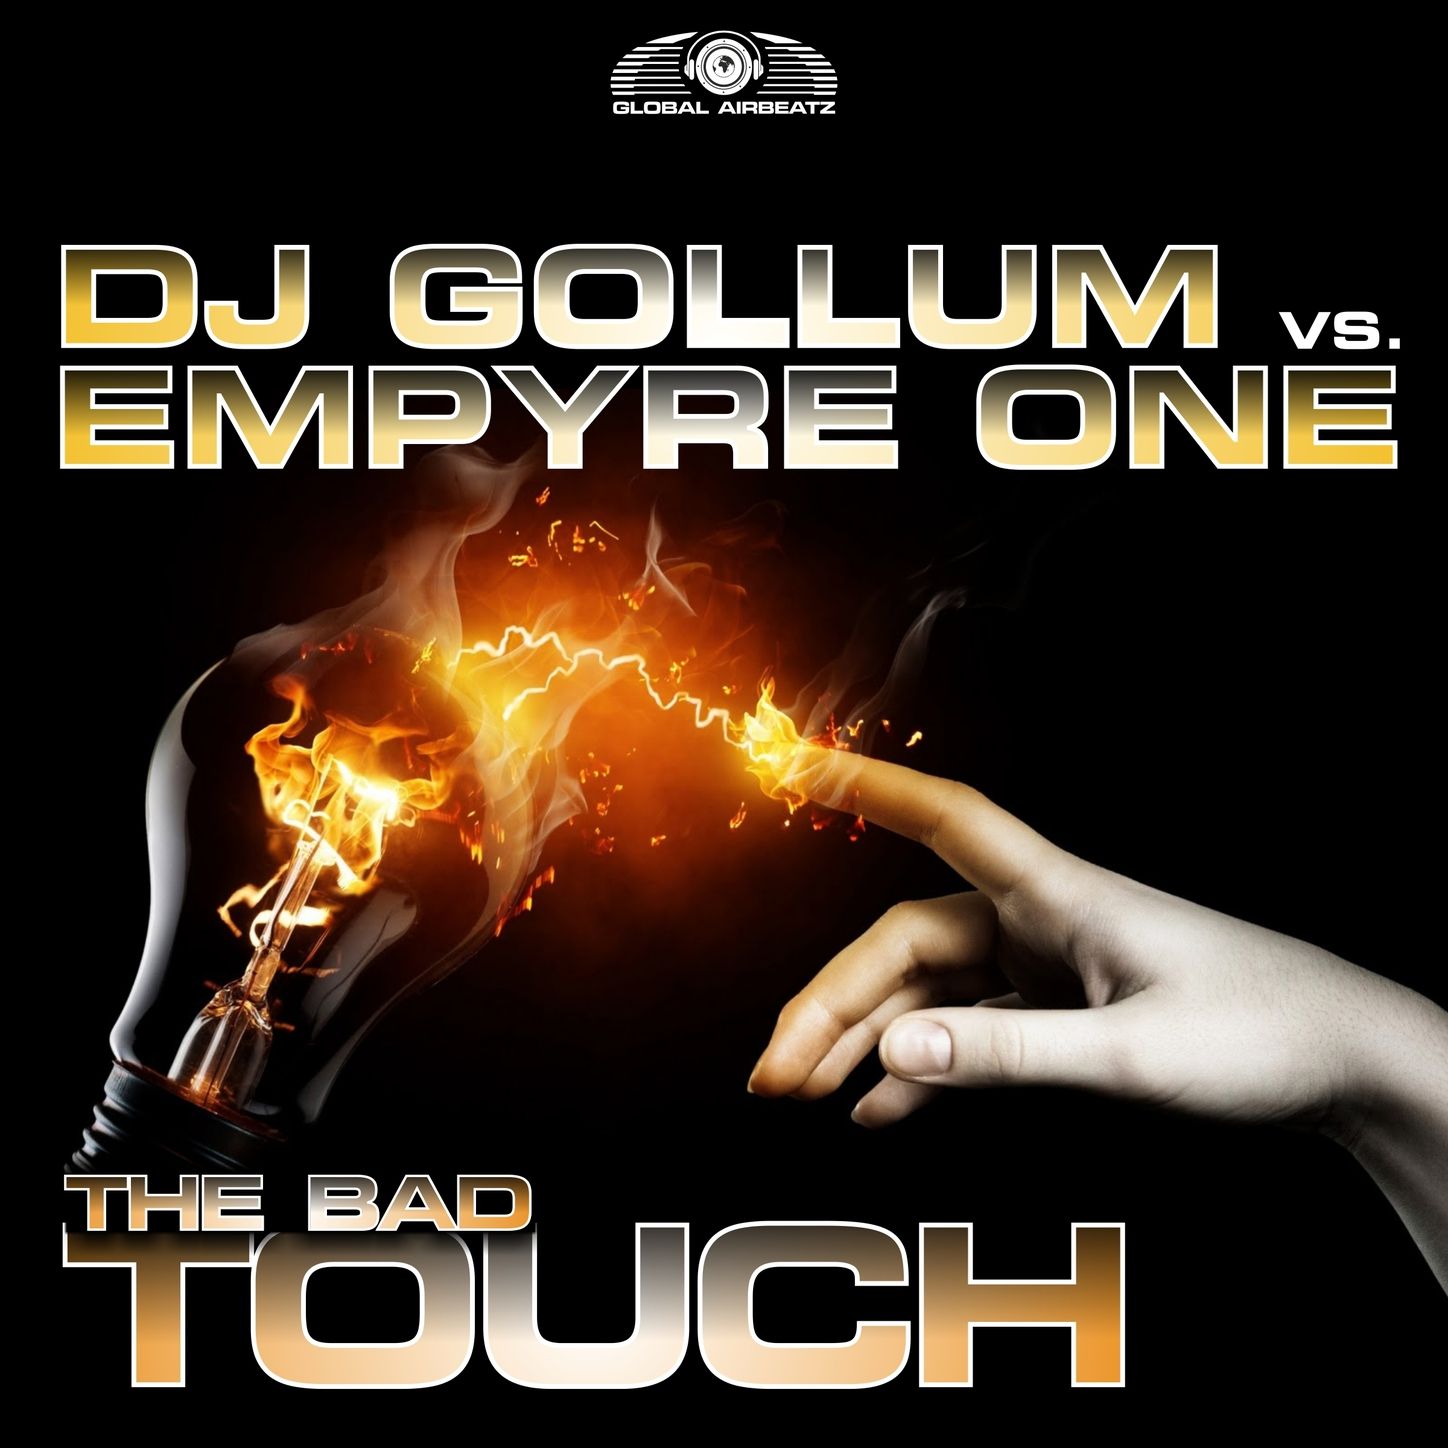 The Bad Touch (Empyre One Remix)